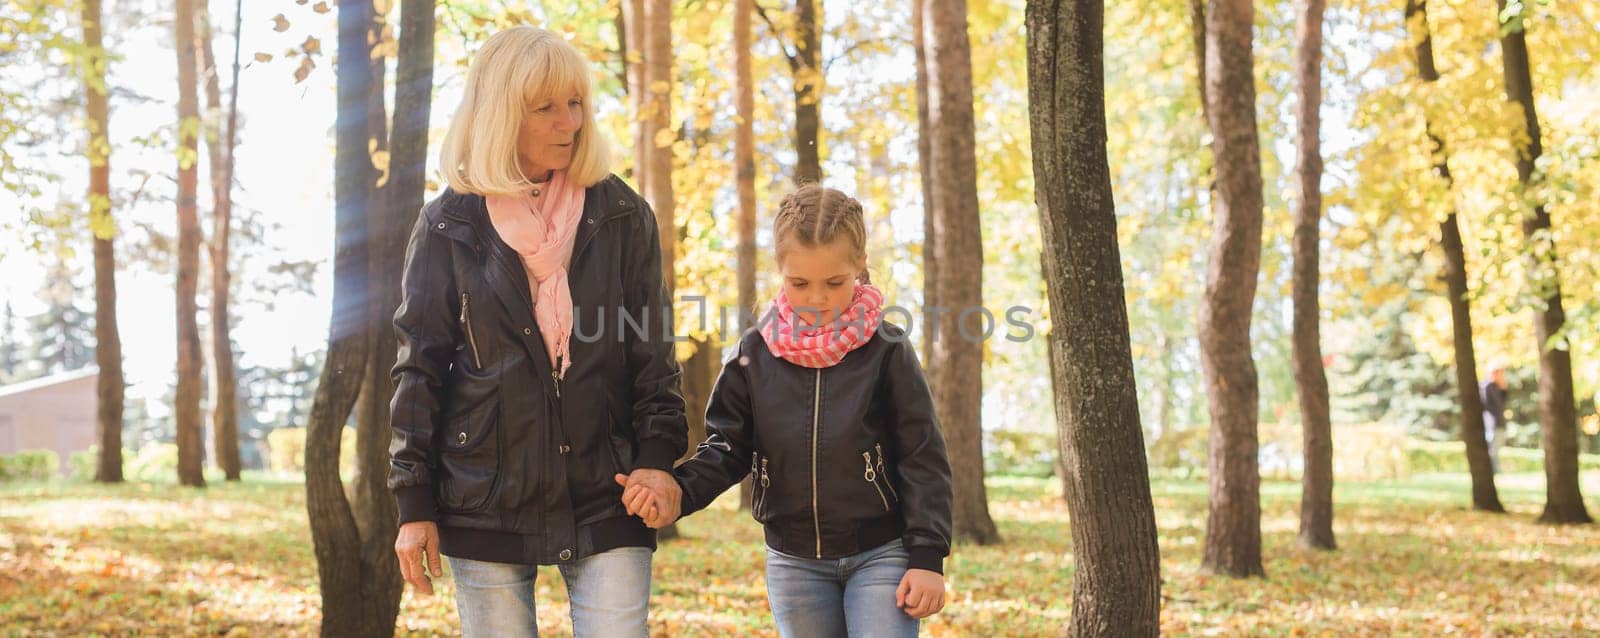 Grandmother with granddaughter in autumn park banner copy space. Generation and family concept. by Satura86